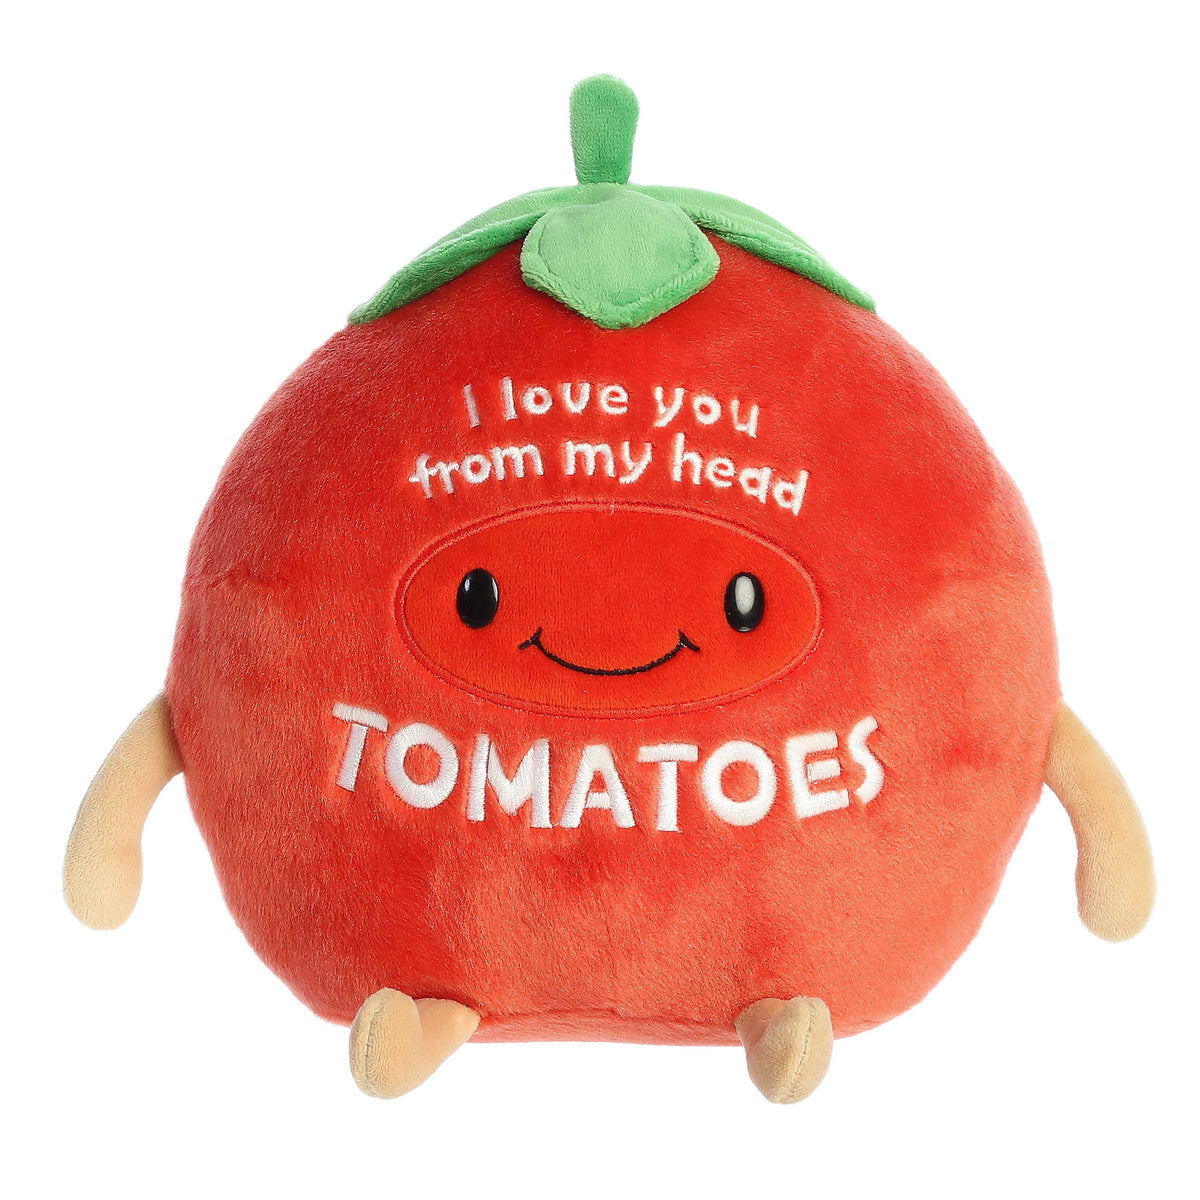 Cute tomato plush toy with a bright red body, green stem crown, and "I love you from my head TOMATOES!" pun written across